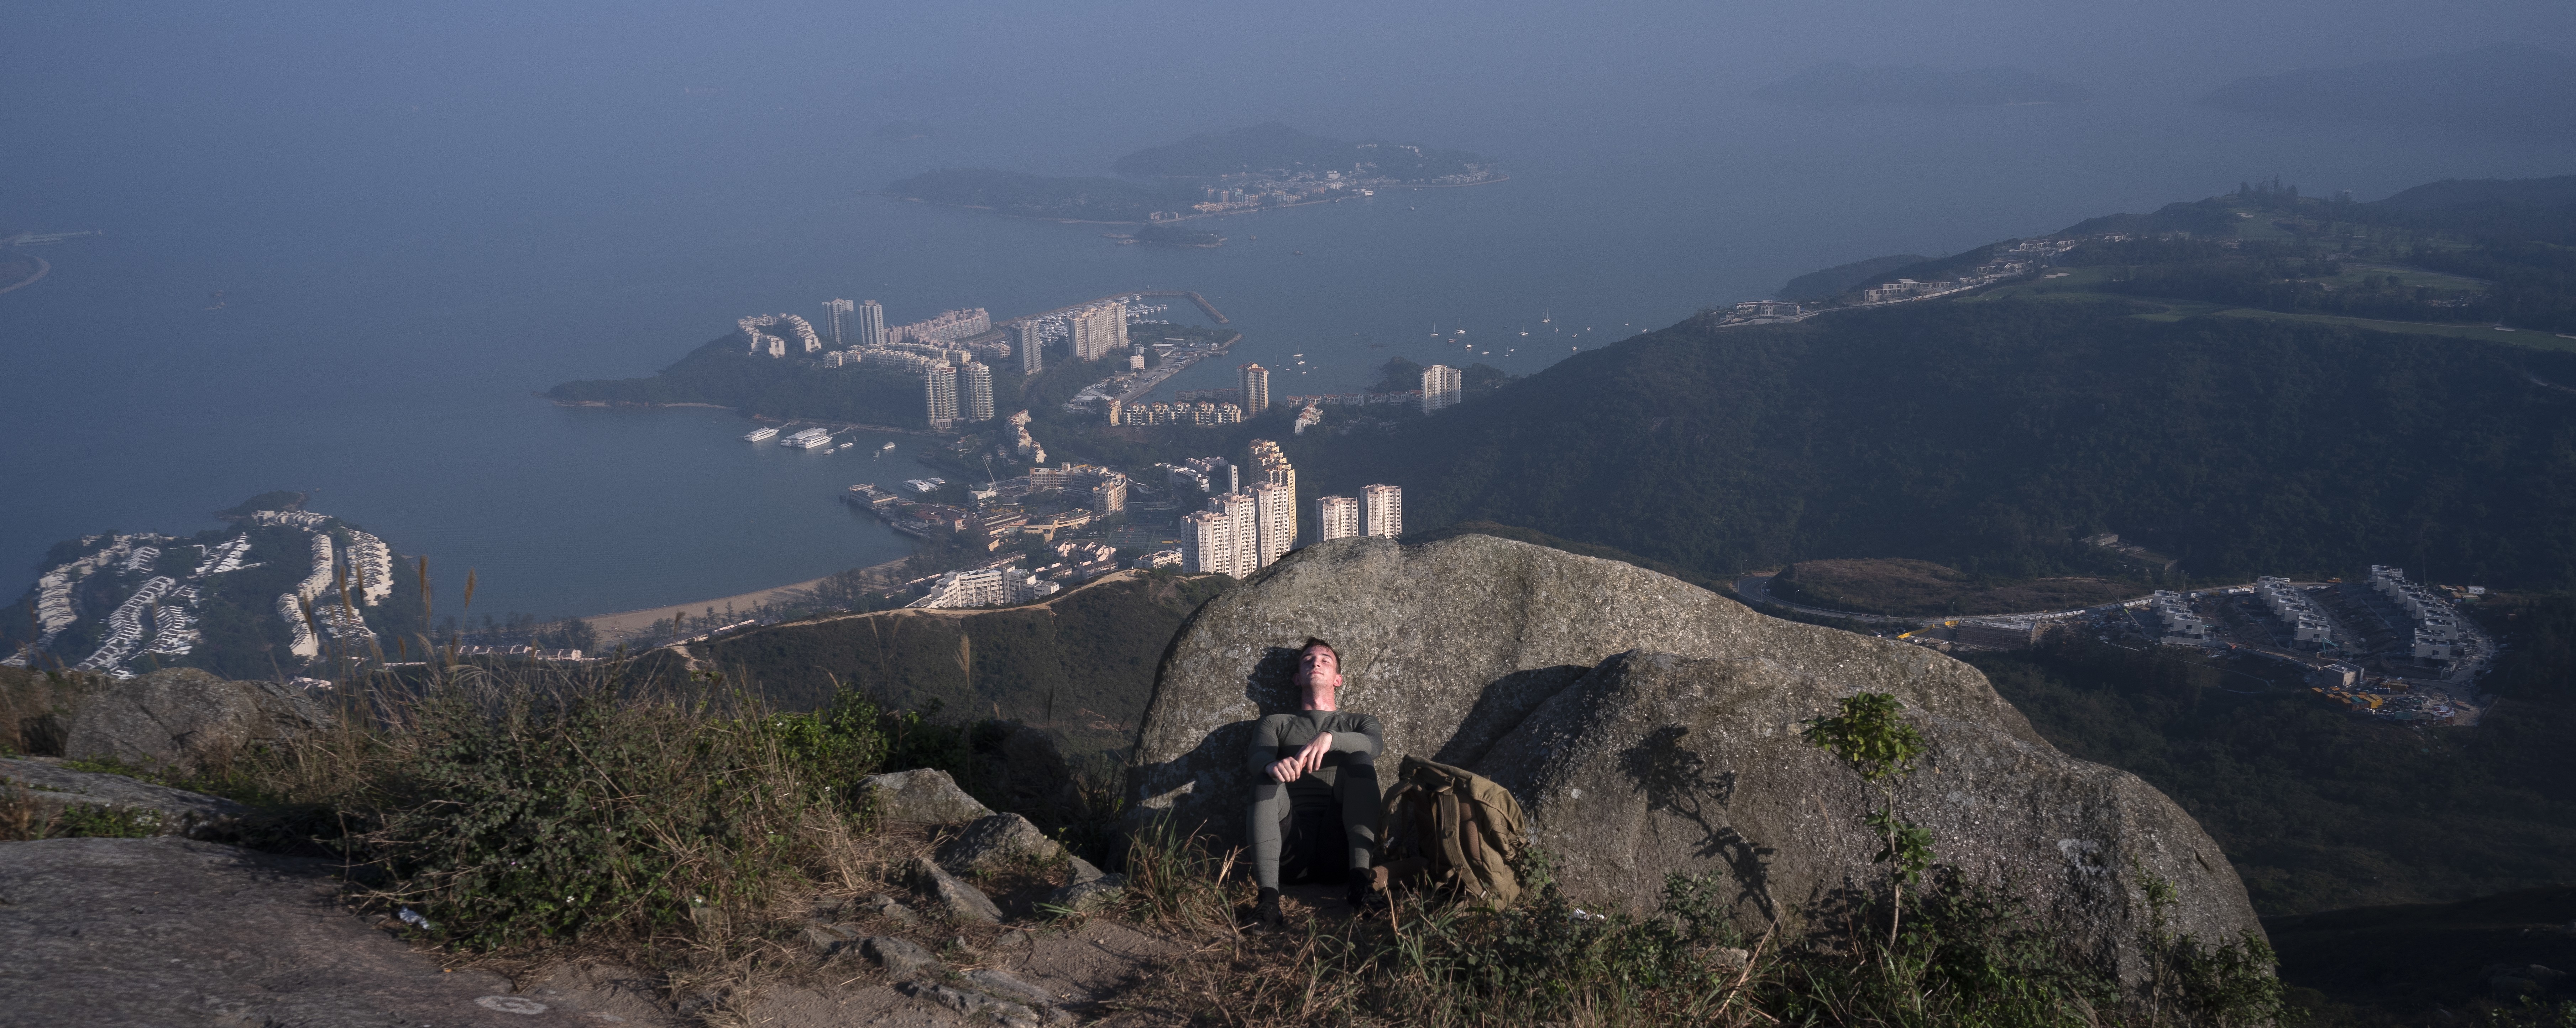 A hiker takes a breather on the popular Lo Fu Tau trail in Lantau North Country Park, with Discovery Bay and Peng Chau island seen in the distance. Chief Executive Carrie Lam announced in October her ambitious ‘Lantau Tomorrow Vision’, which proposes creating artificial islands spanning 1,700 hectares off the eastern coast of Lantau Island. Photo: Robert Ng